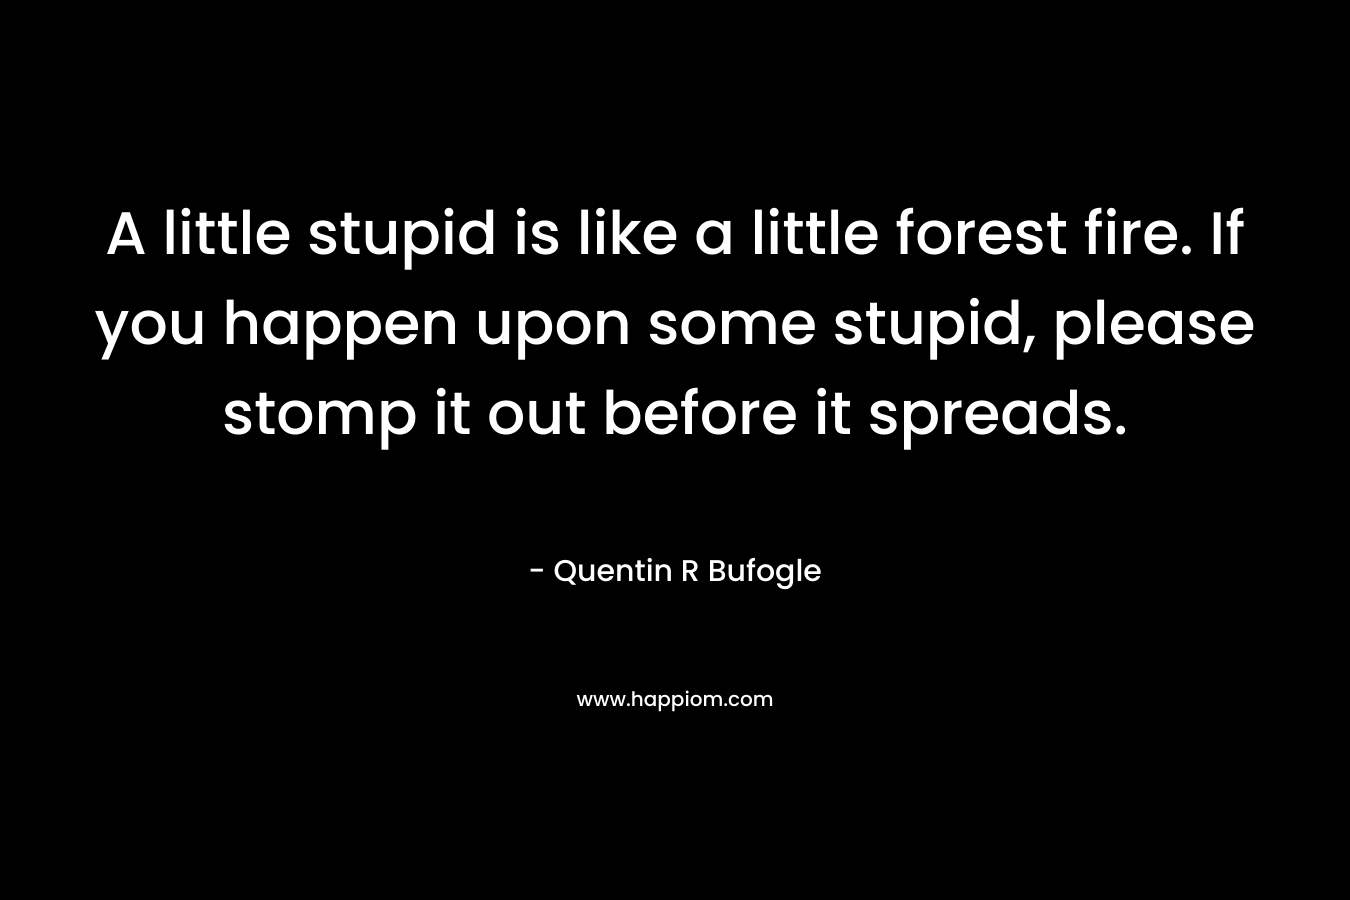 A little stupid is like a little forest fire. If you happen upon some stupid, please stomp it out before it spreads.